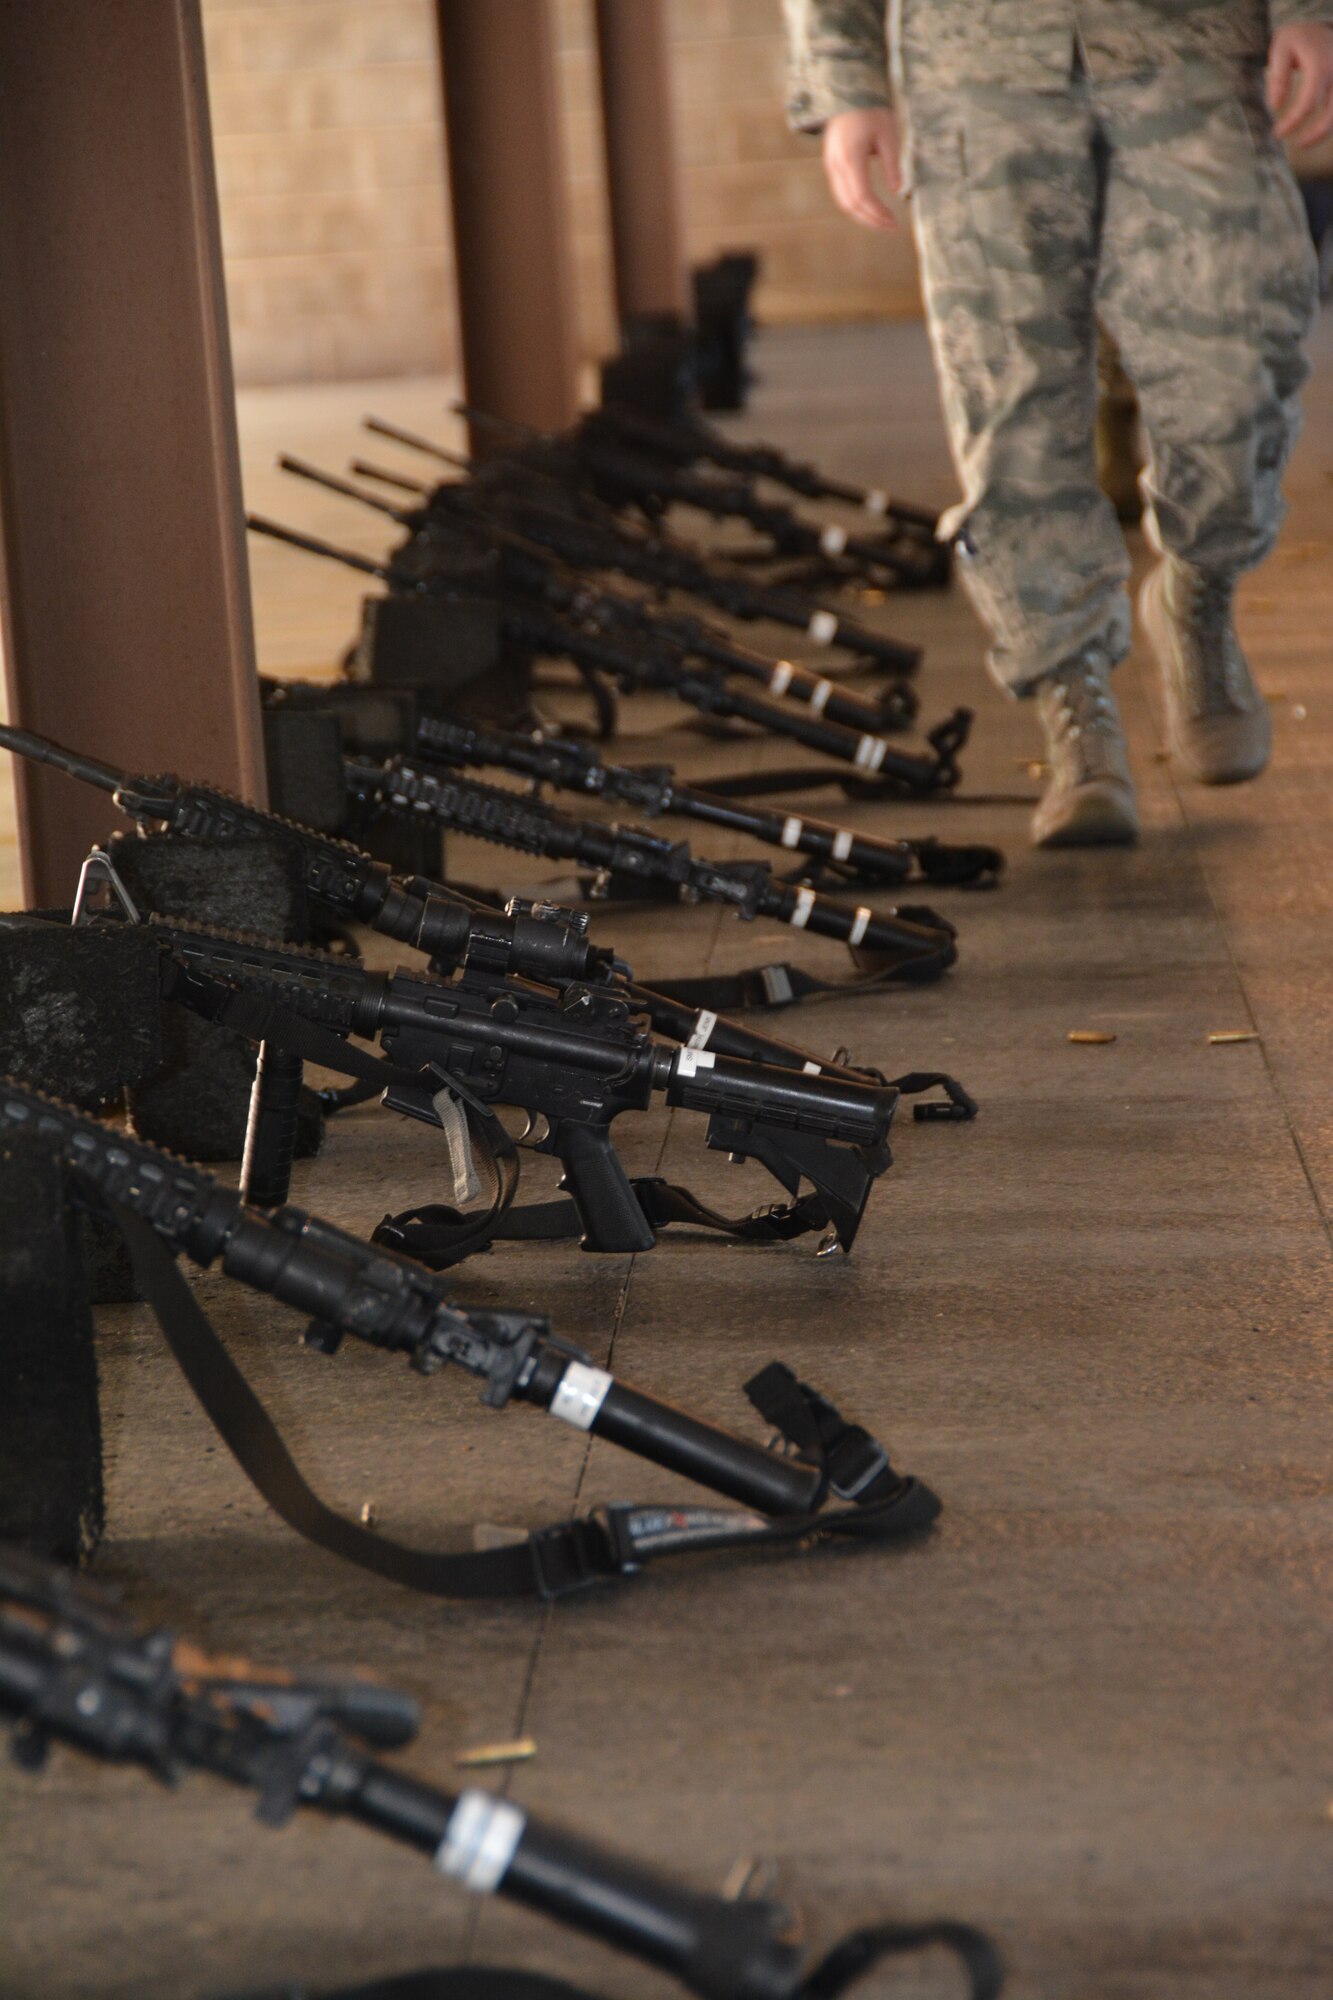 Four Combat Arms Training and Maintenance instructors from the 507th Security Forces Squadron walk out to check targets at the firing range after Airmen fire their M-4 carbines during weapons qualification Oct. 3, 2015, at Tinker Air Force Base, Okla. Reservists interested in joining the Security Forces career field are eligible to receive an enlistment bonus of up to $20,000 for committing to a six-year enlistment, and prior-service Airmen interested in retraining into the field are eligible for a bonus of up to $15,000. (U.S. Air Force photo by Tech. Sgt. Lauren Gleason)
